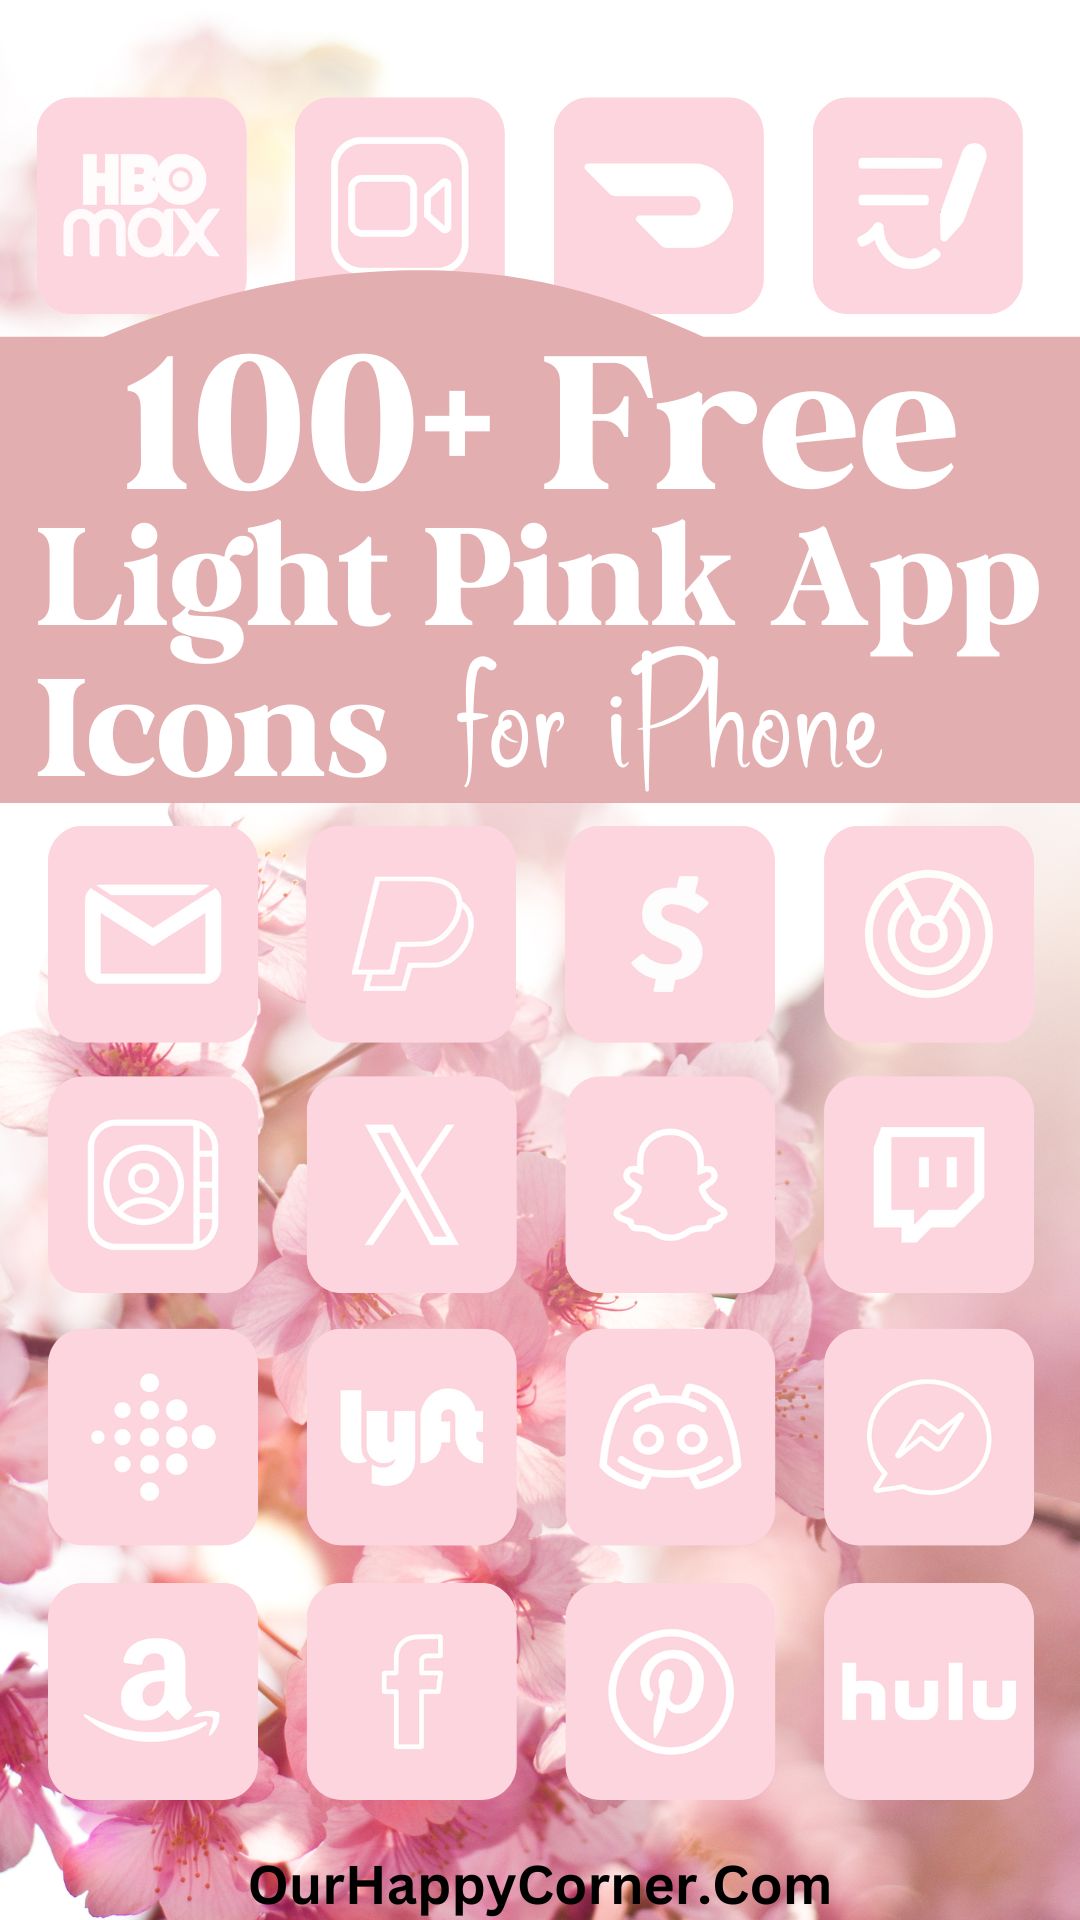 Light Pink App Icons for iPhone